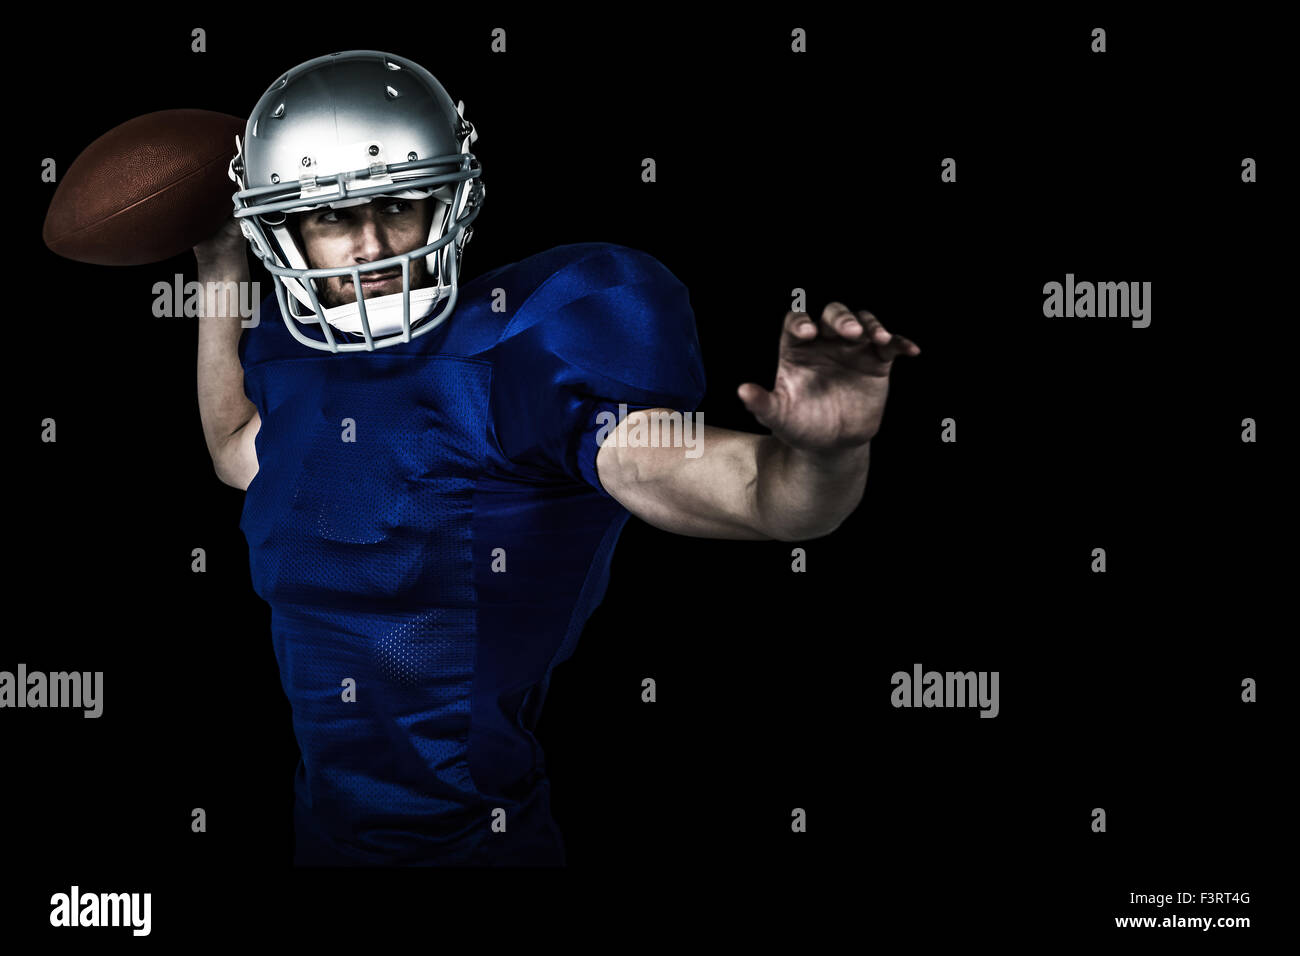 Composite image of american football player throwing ball Stock Photo